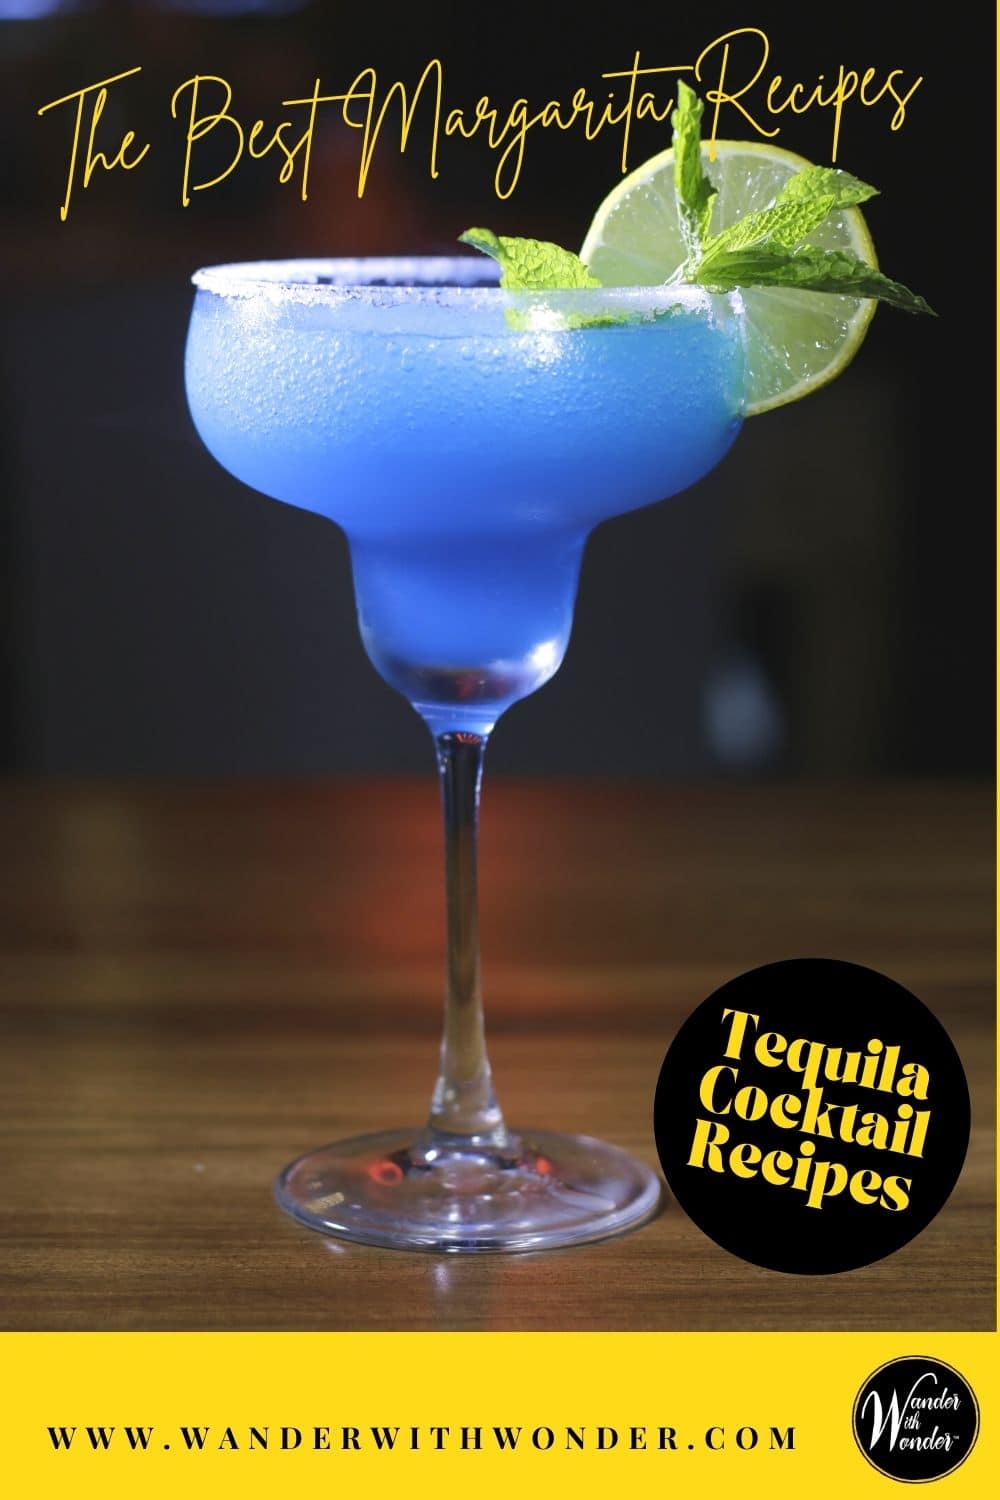 National Margarita Day, Cinco de Mayo, National Tequila Day, or Taco Tuesday? It's margarita time! Enjoy the best margarita recipes and some links to more of my favorite cocktail recipes.